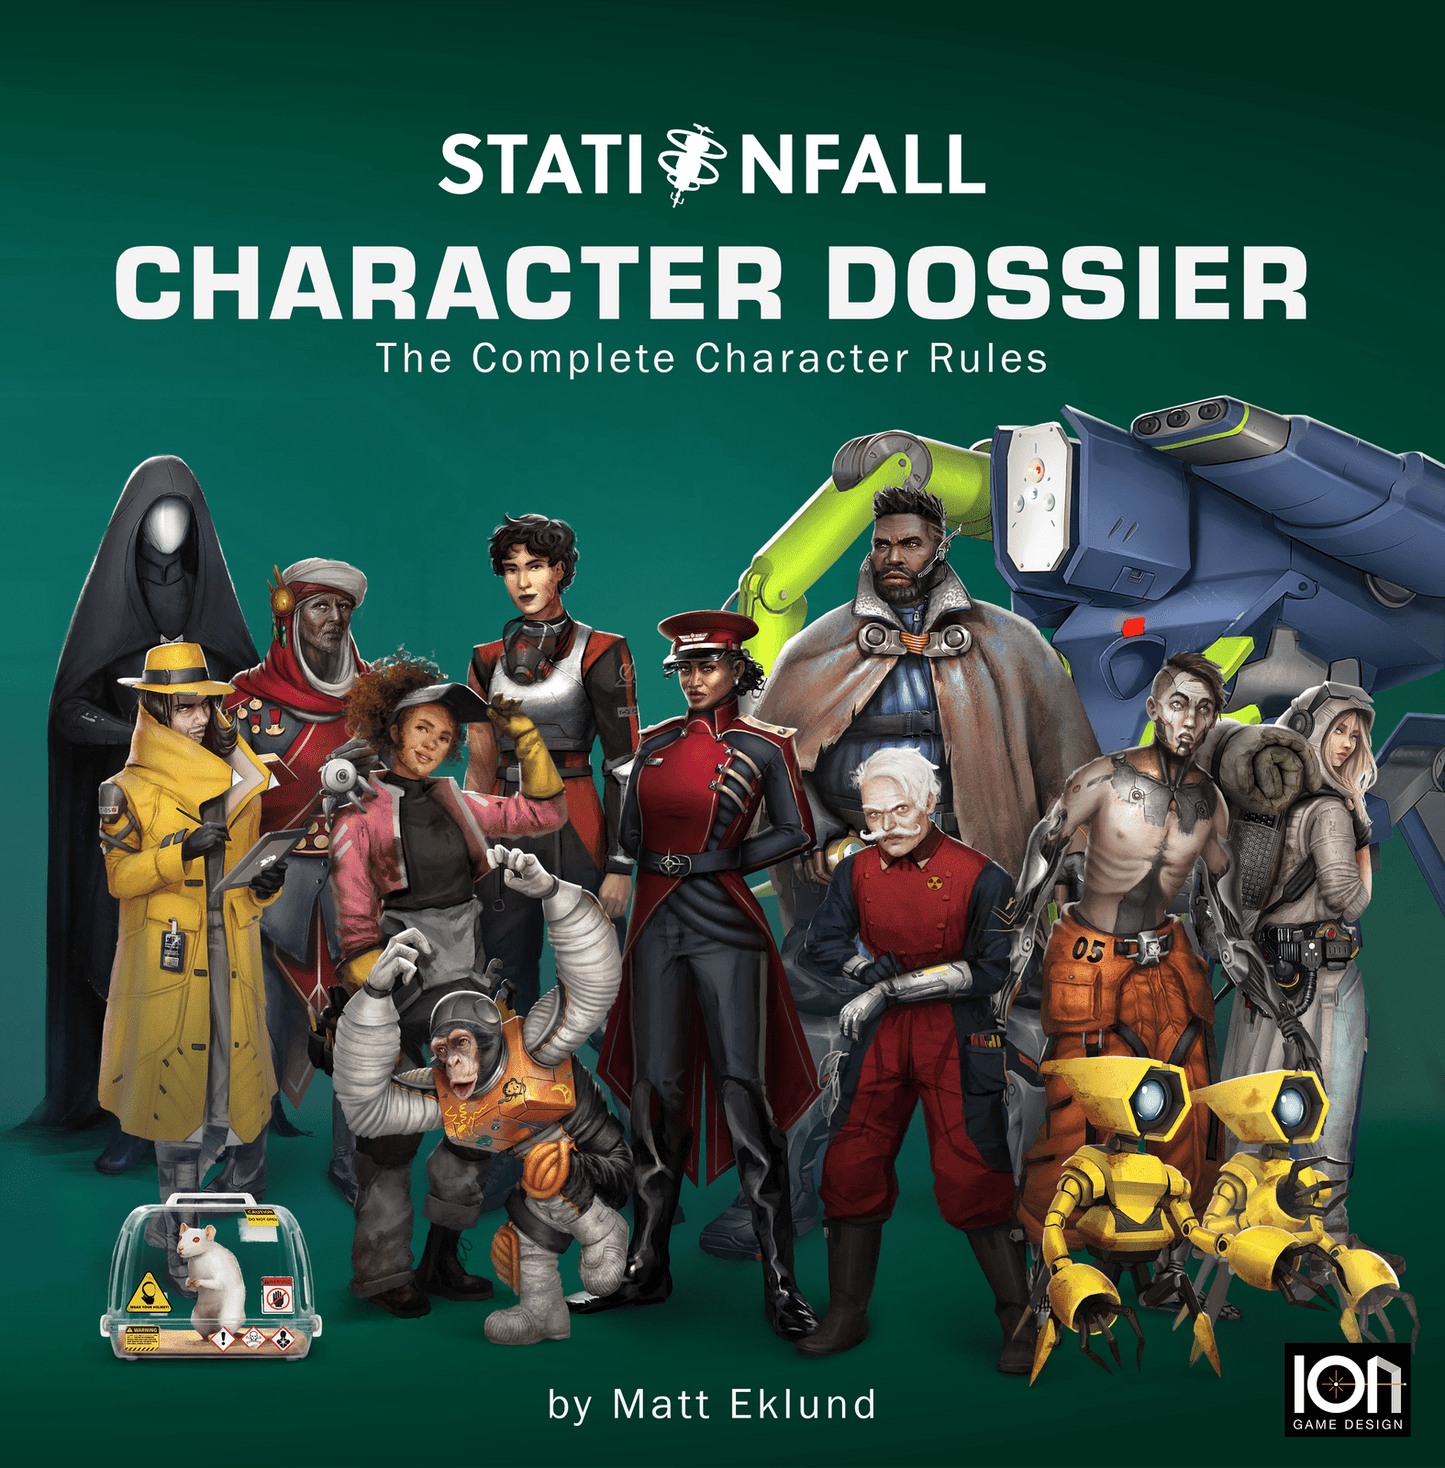 Stationfall Character dossiers (RETAIL)